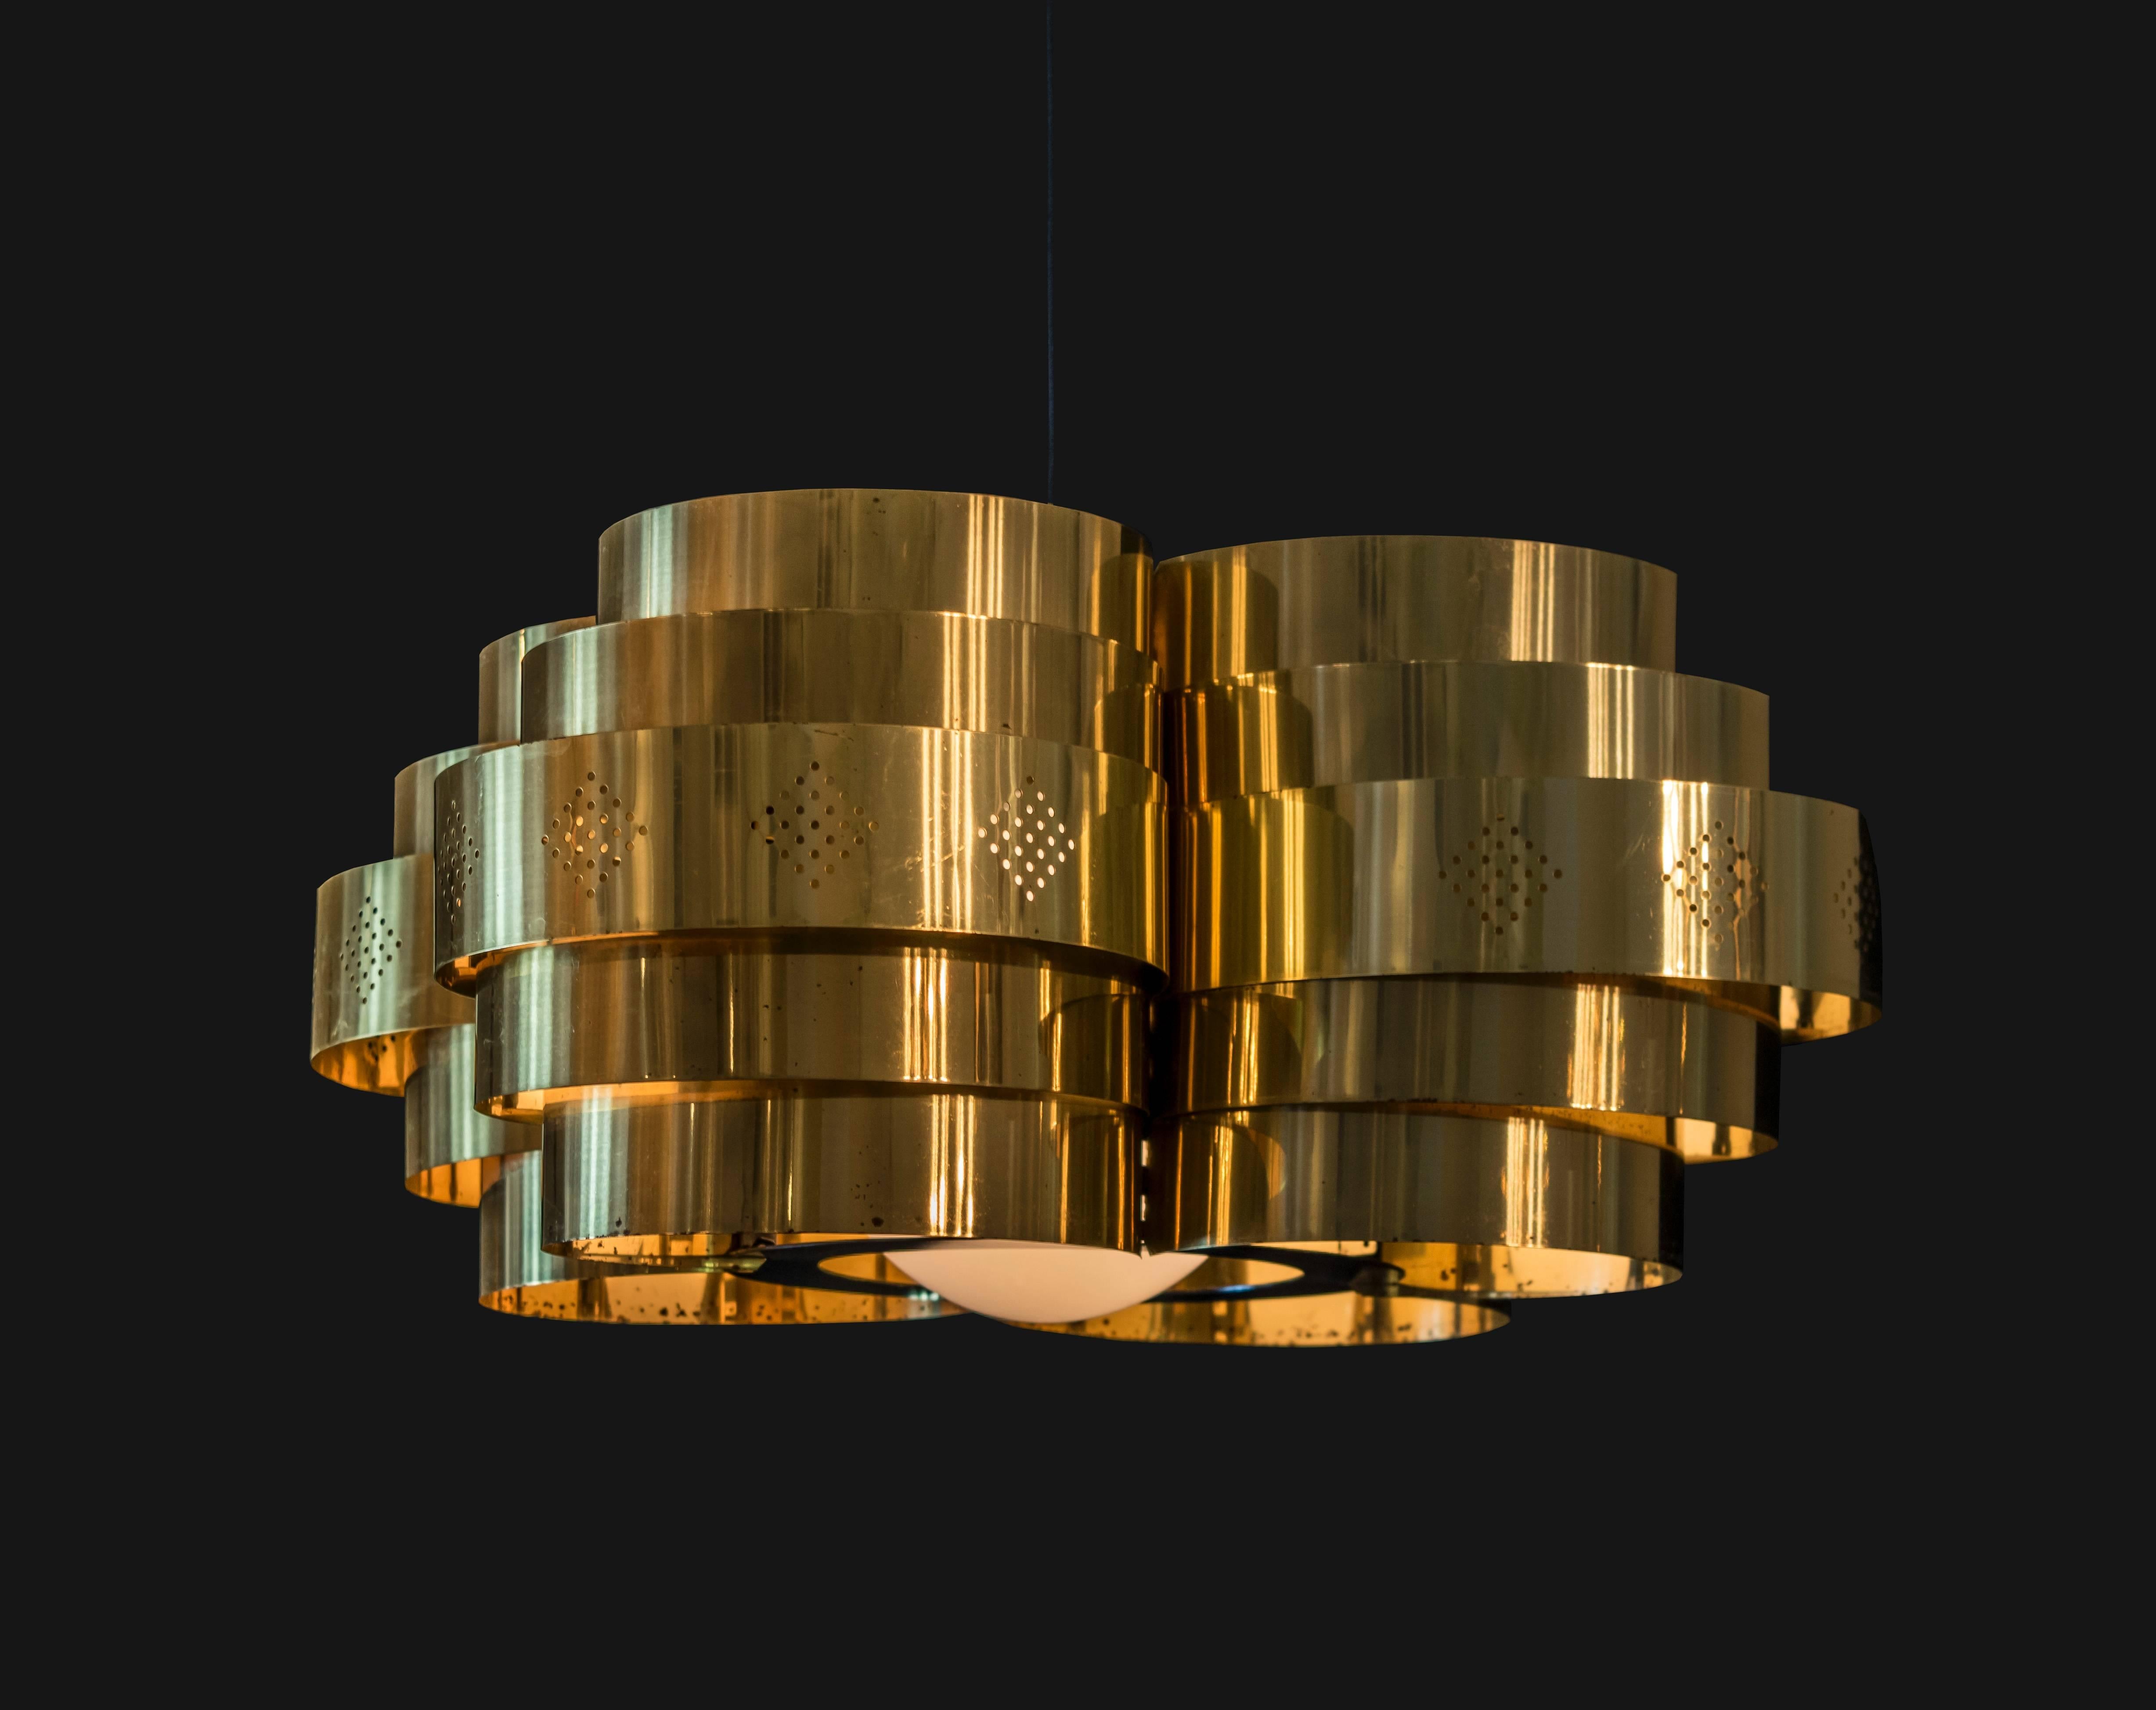 Interesting four-leaf clover shaped light with variable sizes of brass down light.